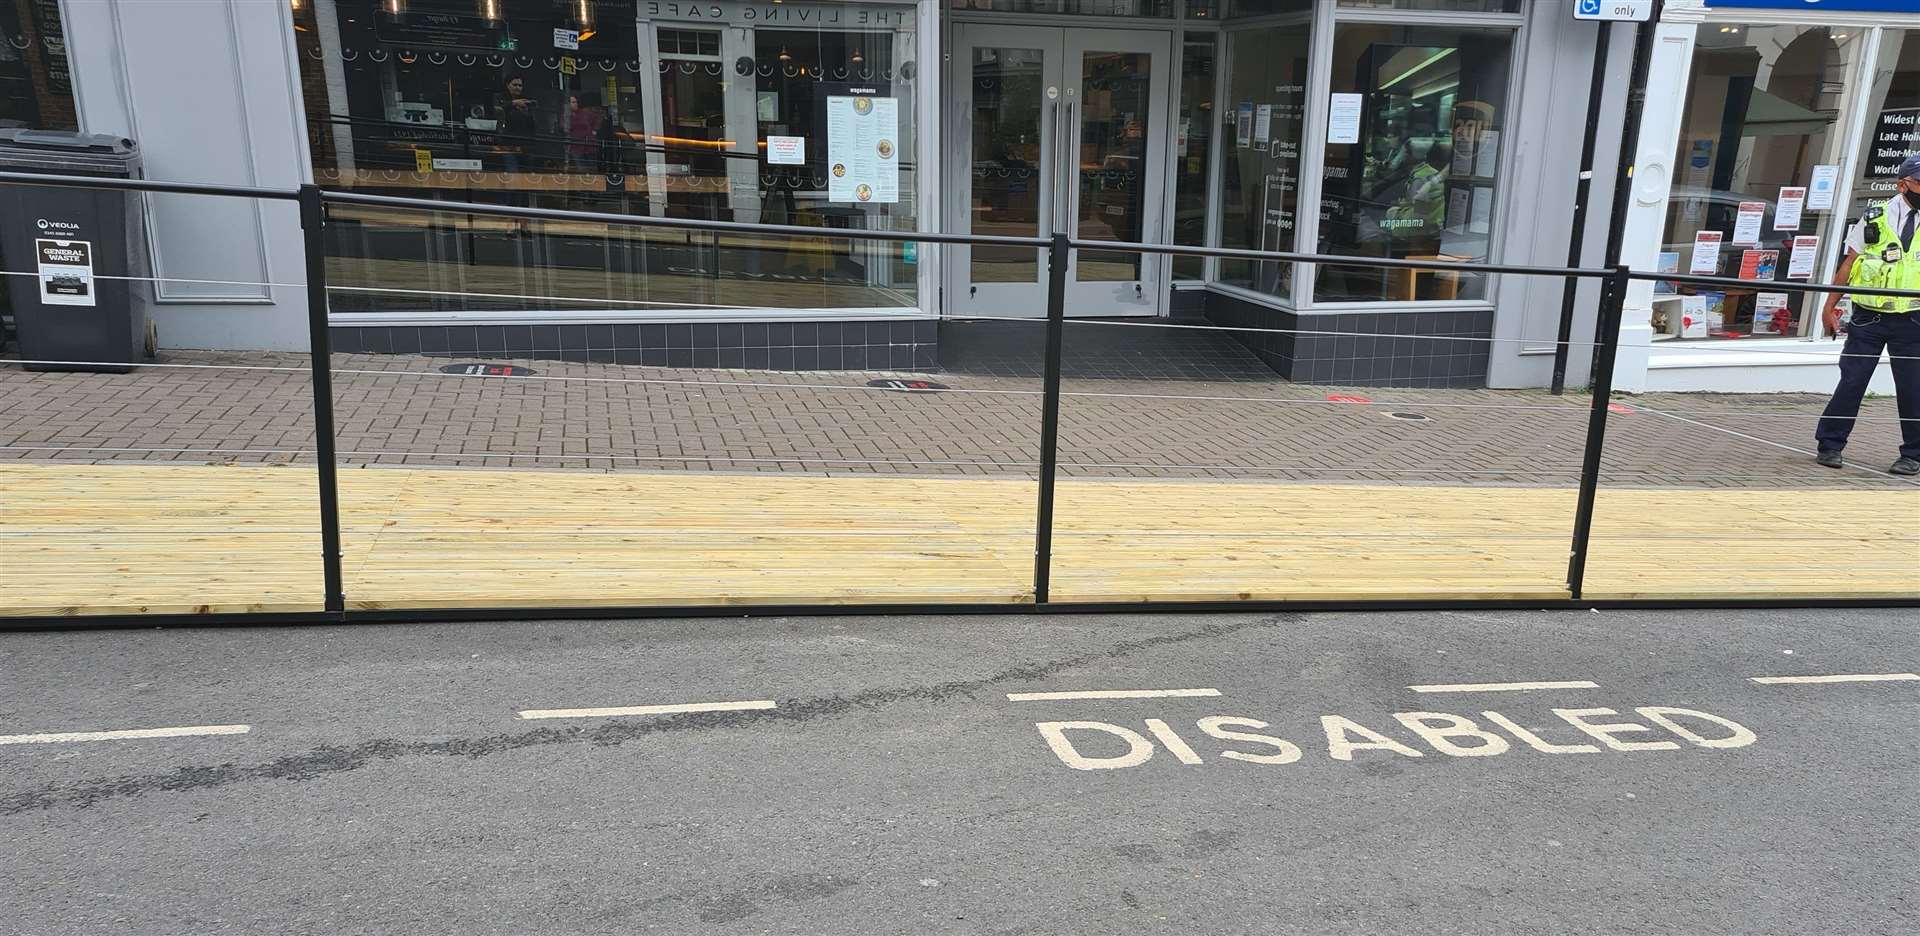 The bay in Earl Street has a new 'parklet' on top of it